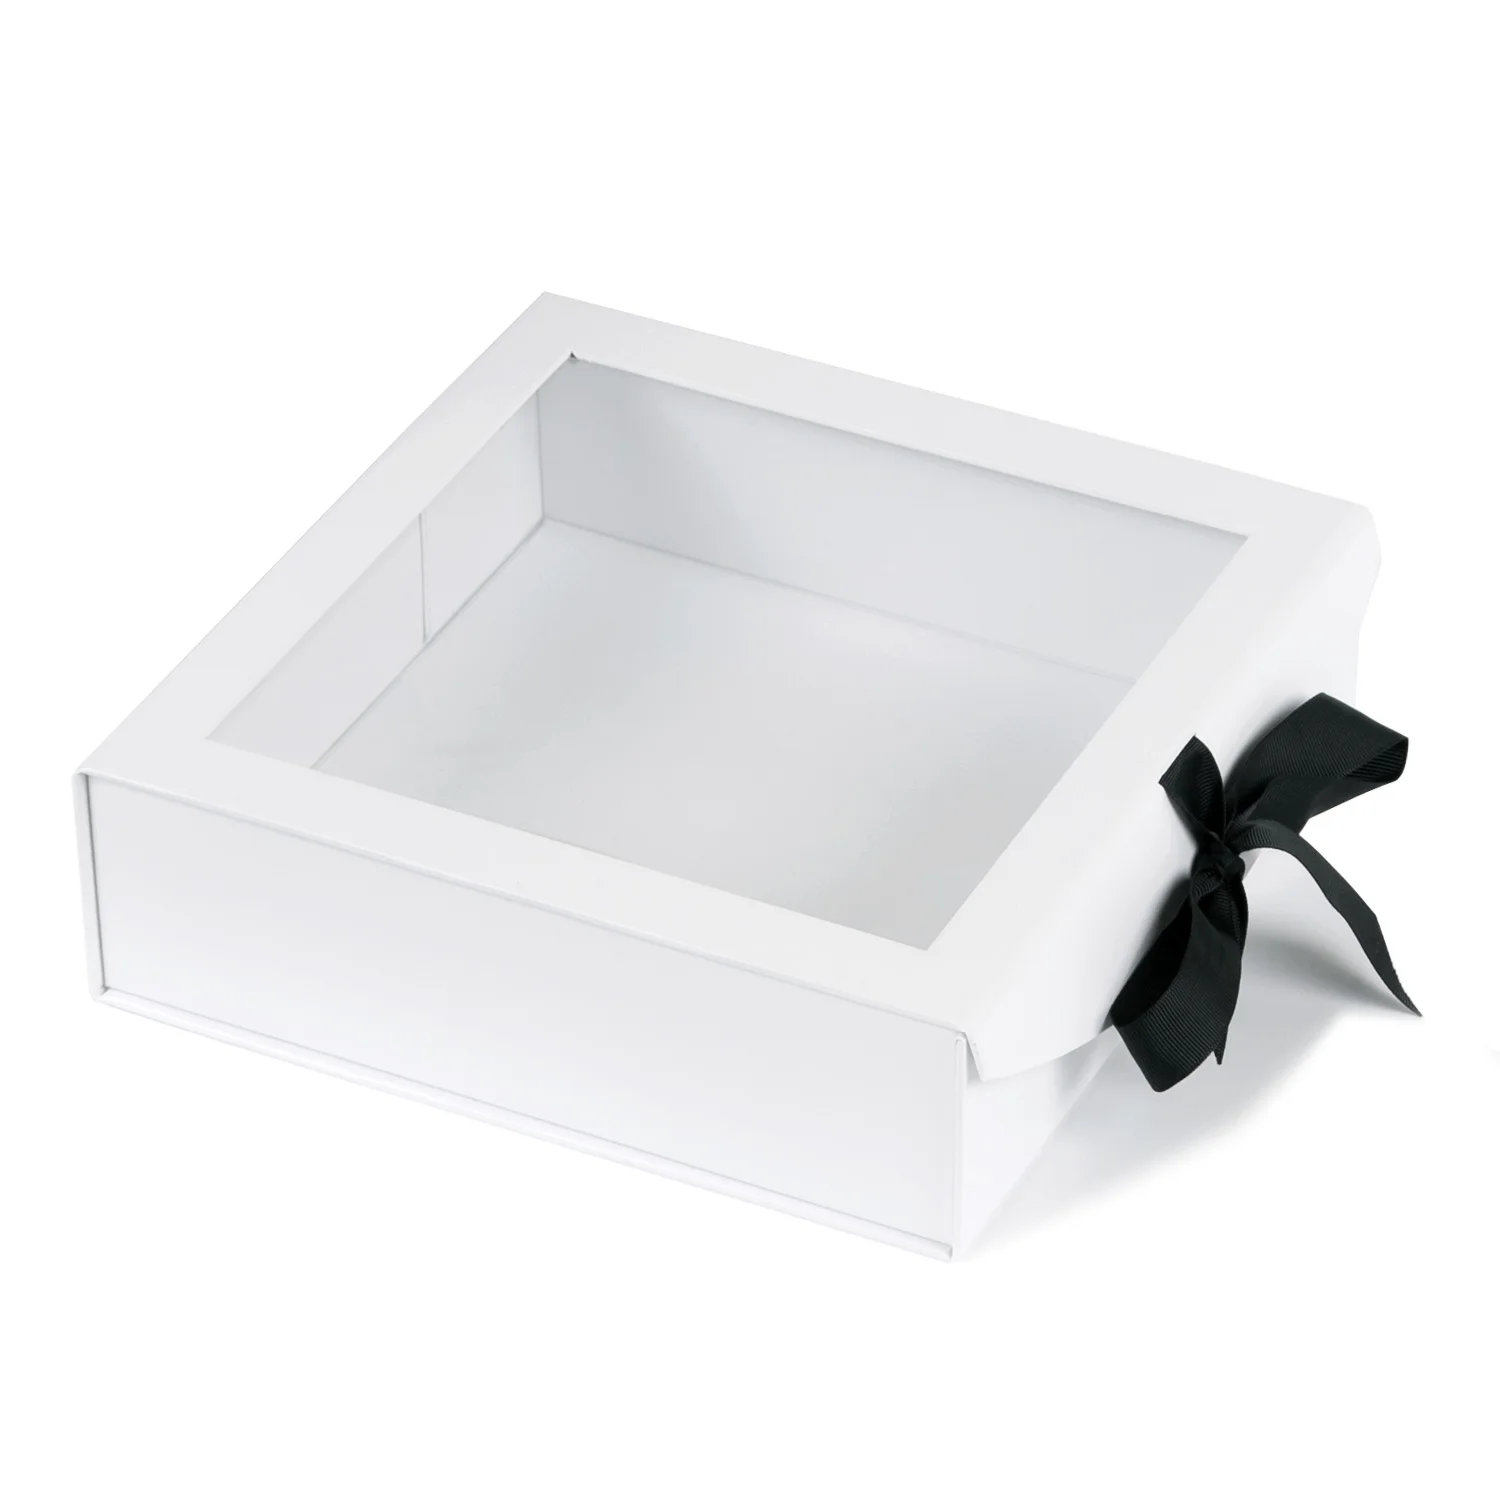 Luxury Gift Boxes with Lid and Ribbon Collapsible Bridesmaid Proposal Box JiaWei Gift Box 13x12.1x4.5 Inches Birthday Wedding Magnetic Hard Cardboard Gift Box White Decorative Box for Presents 